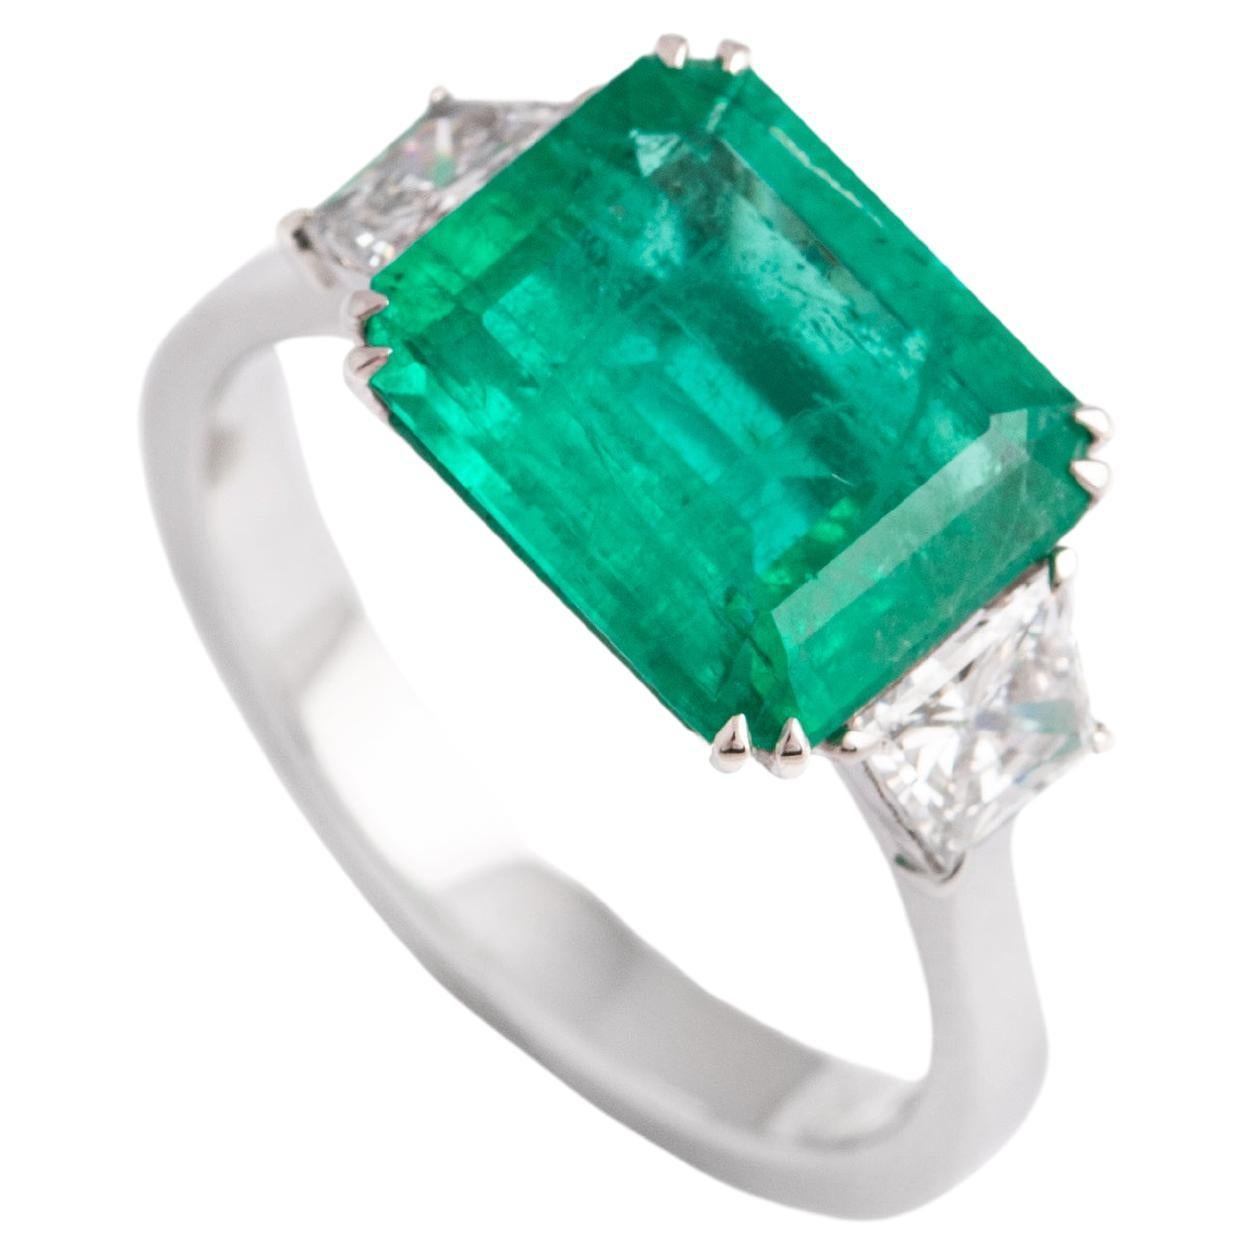 3.25 Carat Colombian Emerald Ring For Sale